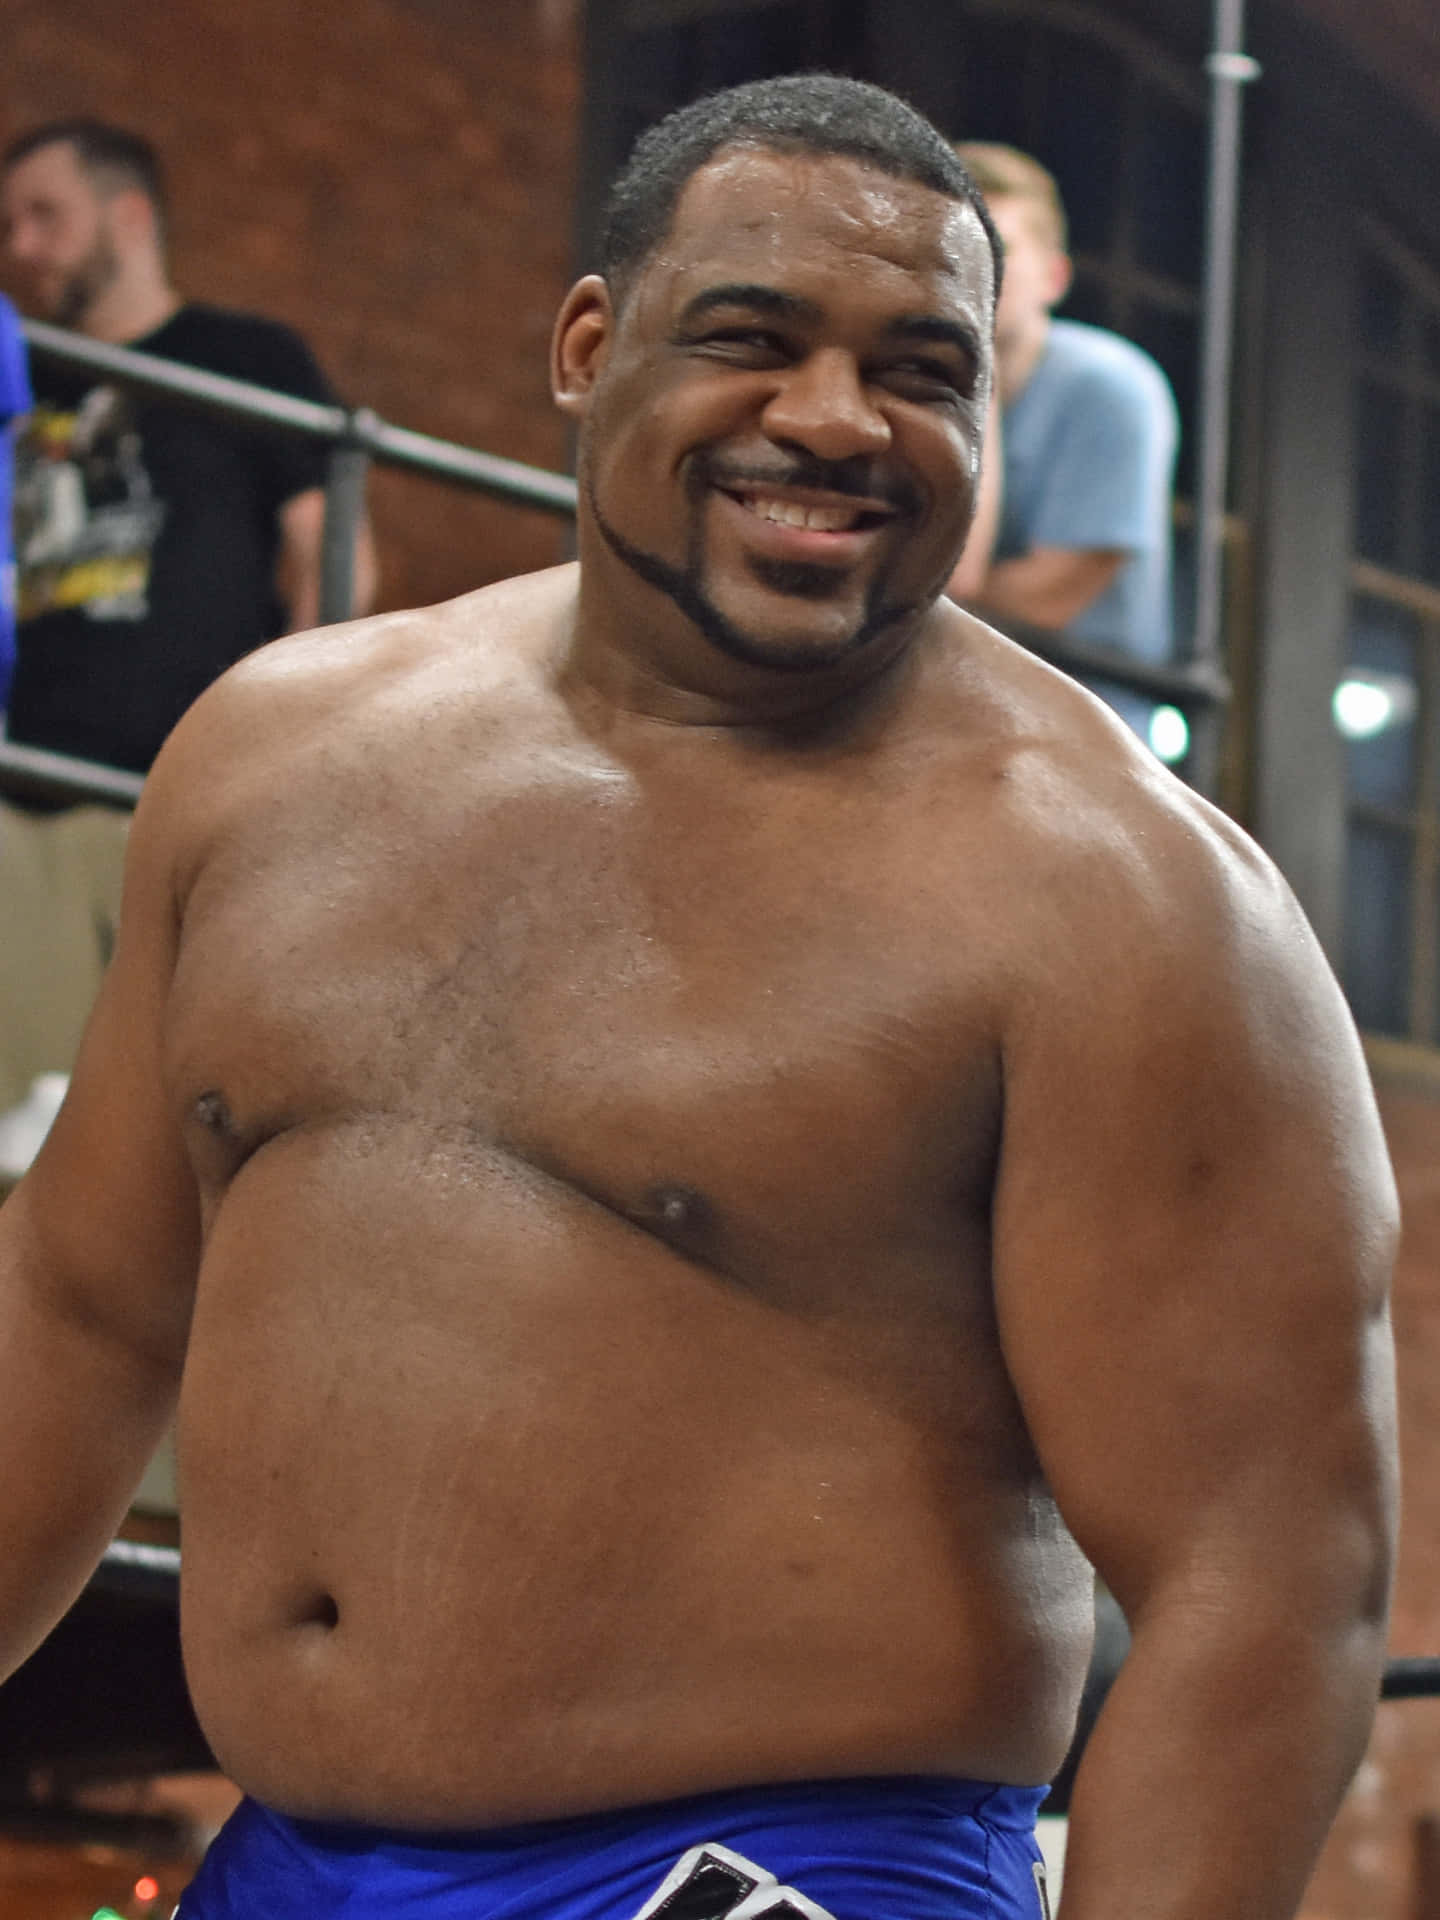 Rising Star Keith Lee Topless at a Wrestling Match 2018 Wallpaper